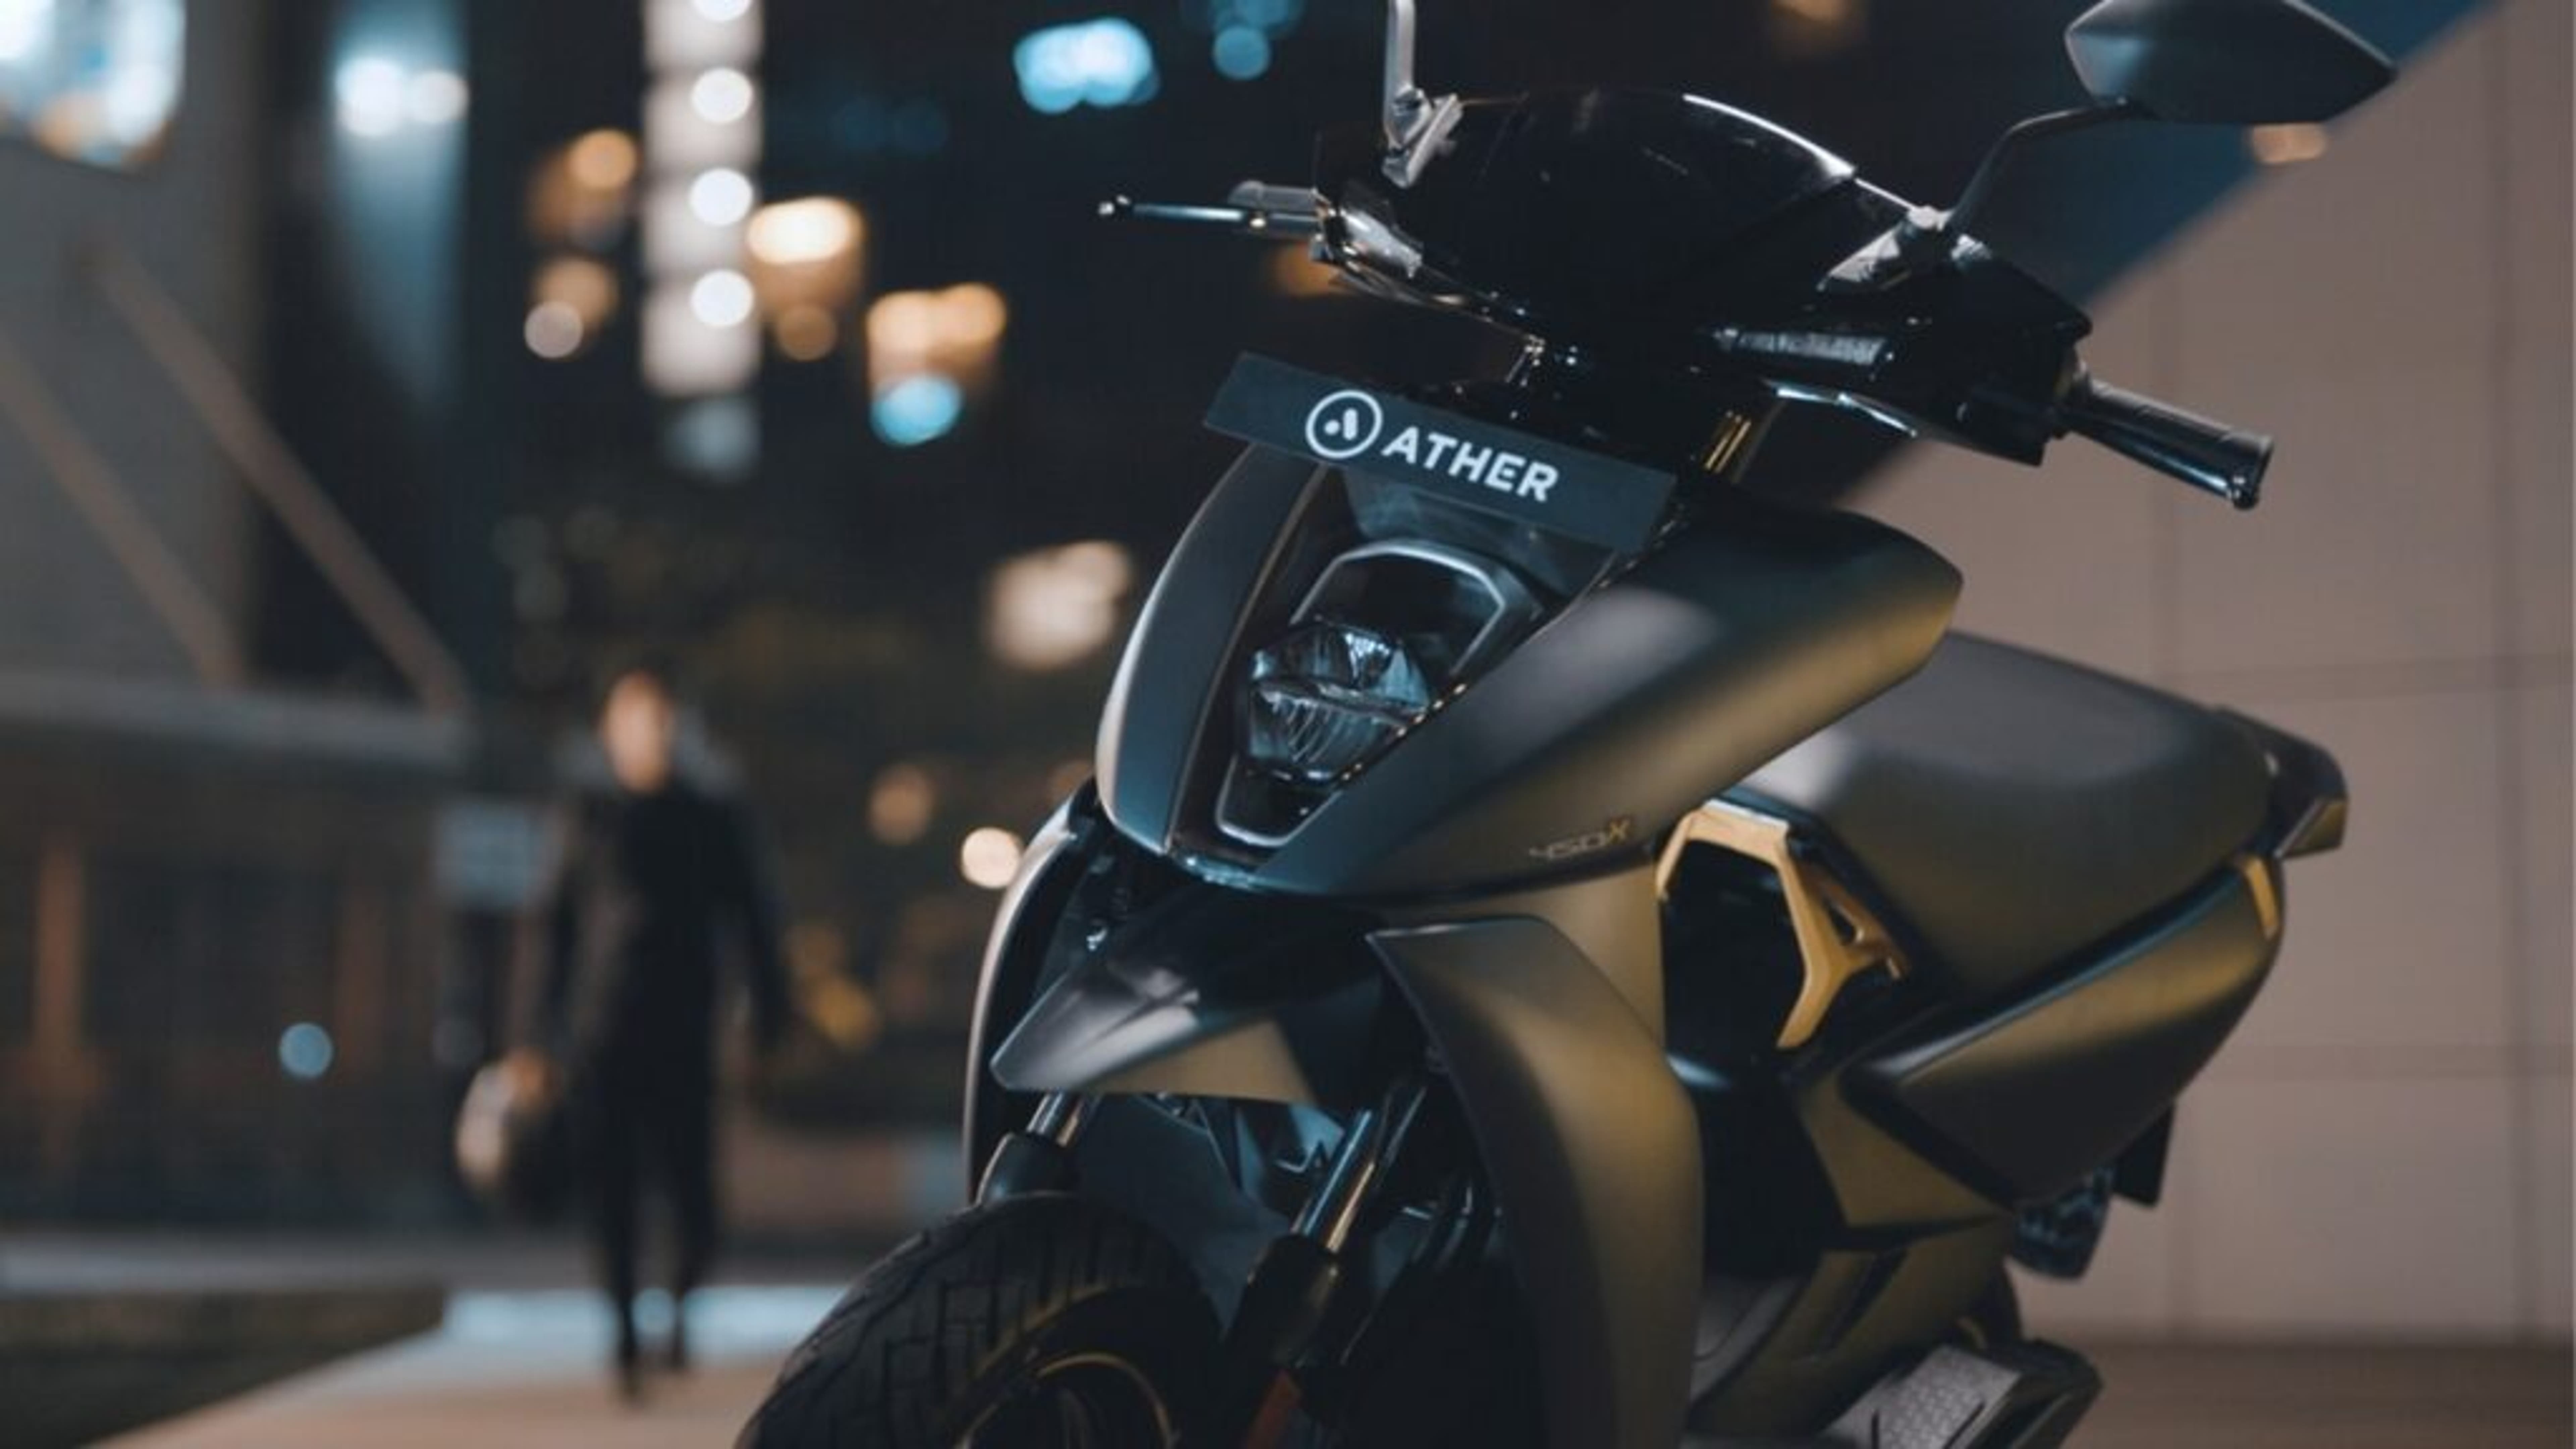 Ather Energy Decides To Bundle Chargers, Plan Refunds To Customer Amid FAME II Scheme Changes